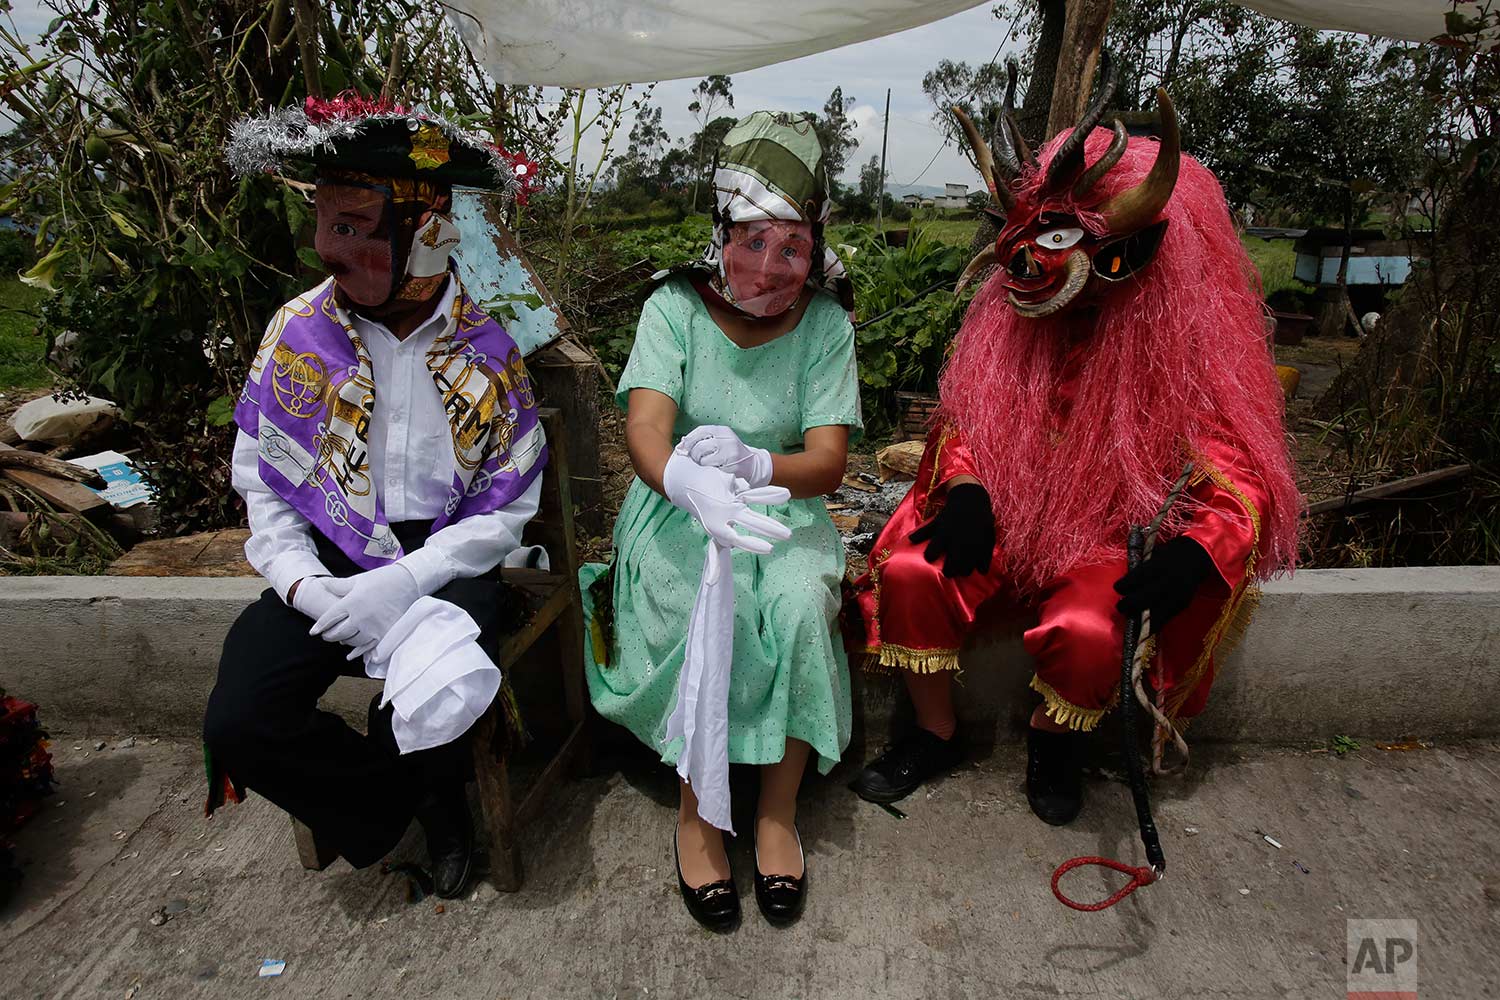  People dressed in costumes take a break during the traditional New Year's festival known as "La Diablada", in Pillaro, Ecuador, Friday, Jan. 5, 2018. (AP Photo/Dolores Ochoa) 